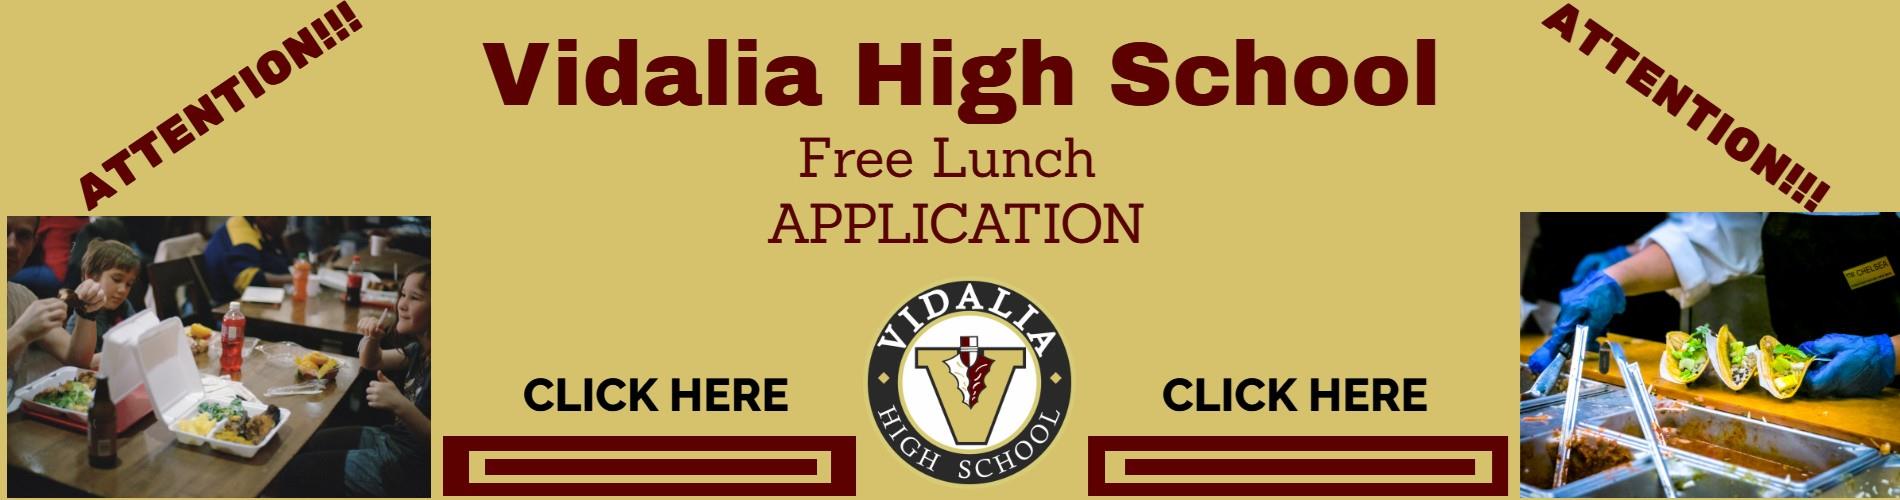 Free Lunch Application